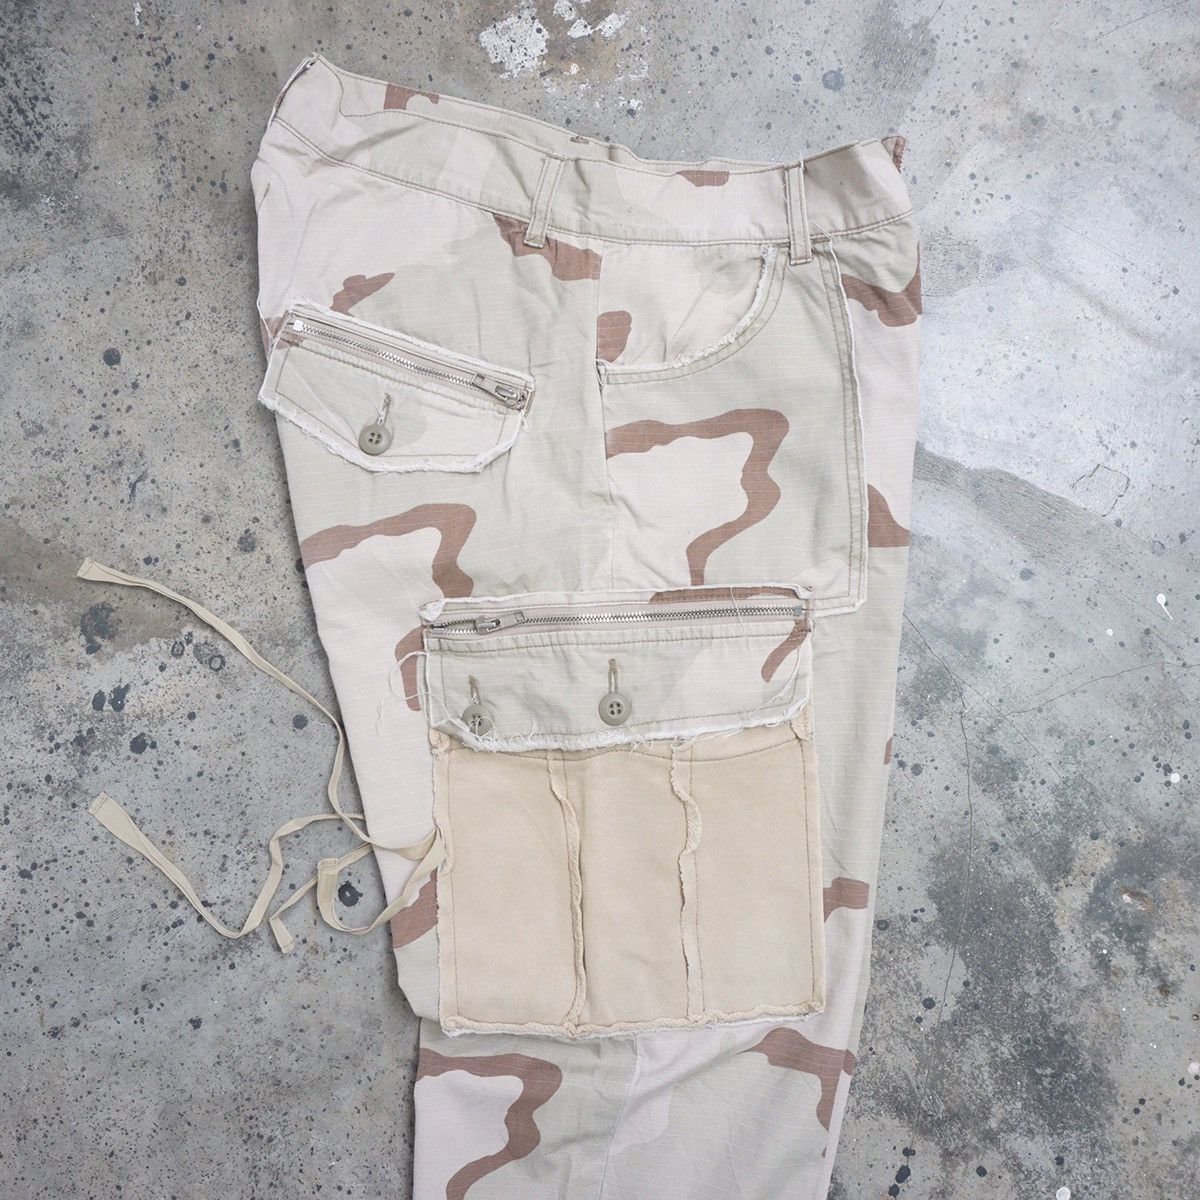 Post Overalls Camo tactical Cargo Pant Size US 33 - 7 Thumbnail